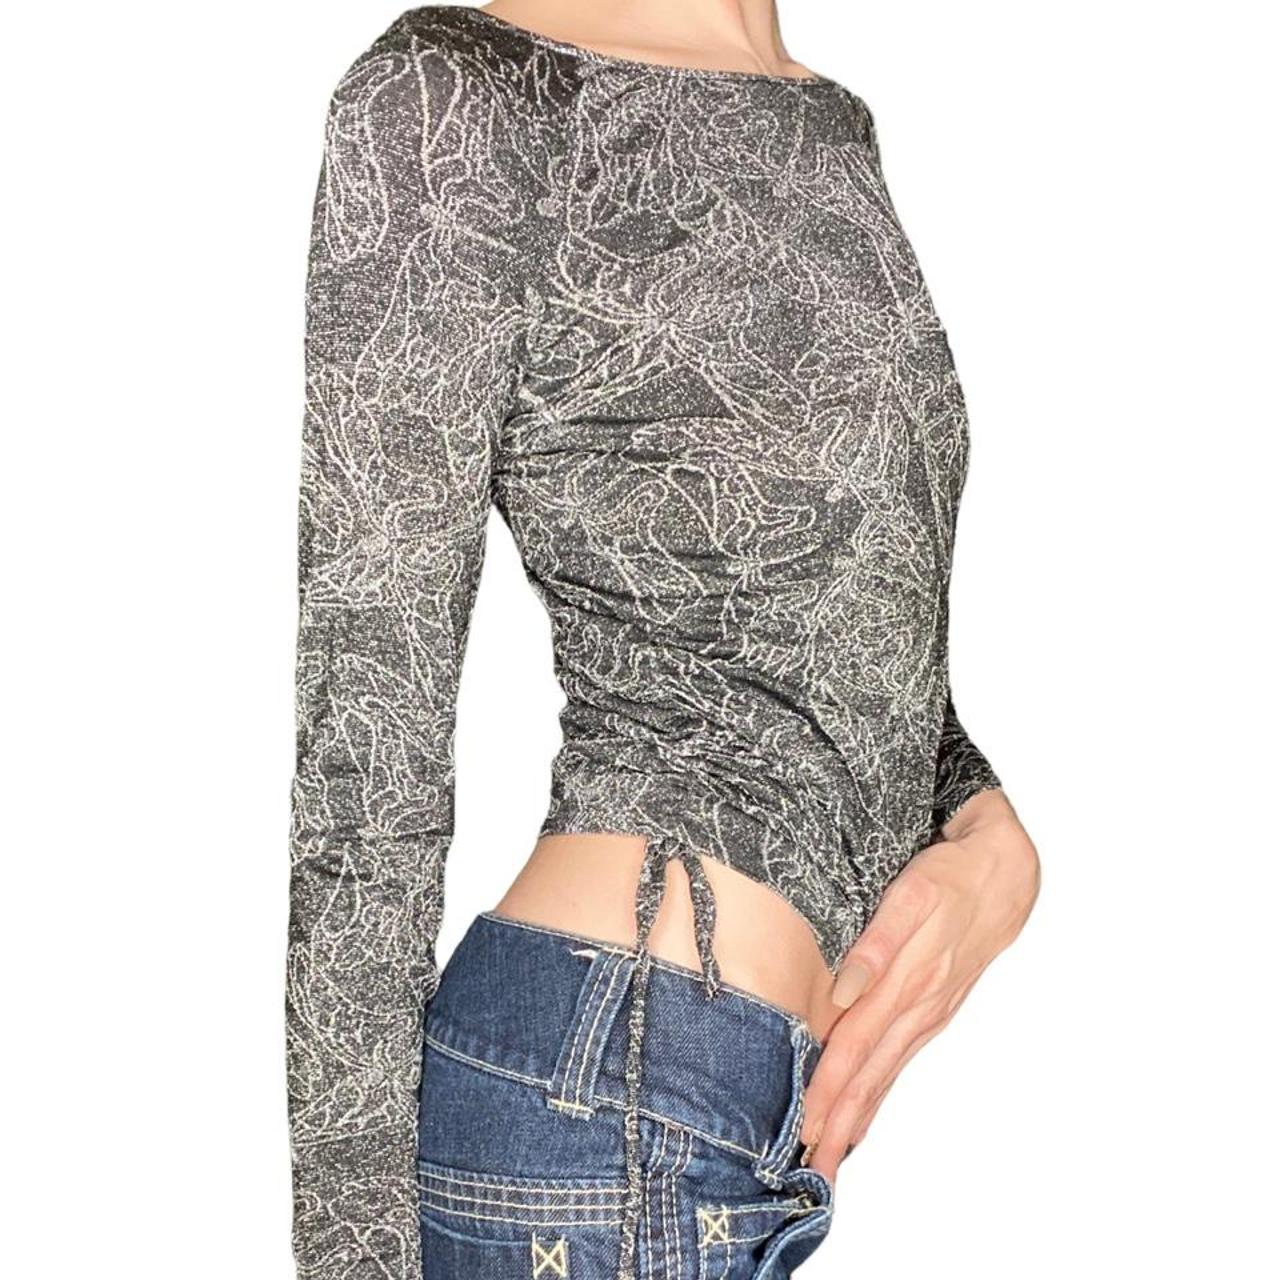 Product Image 2 - Vintage ruched sparkly butterfly top
Brand: